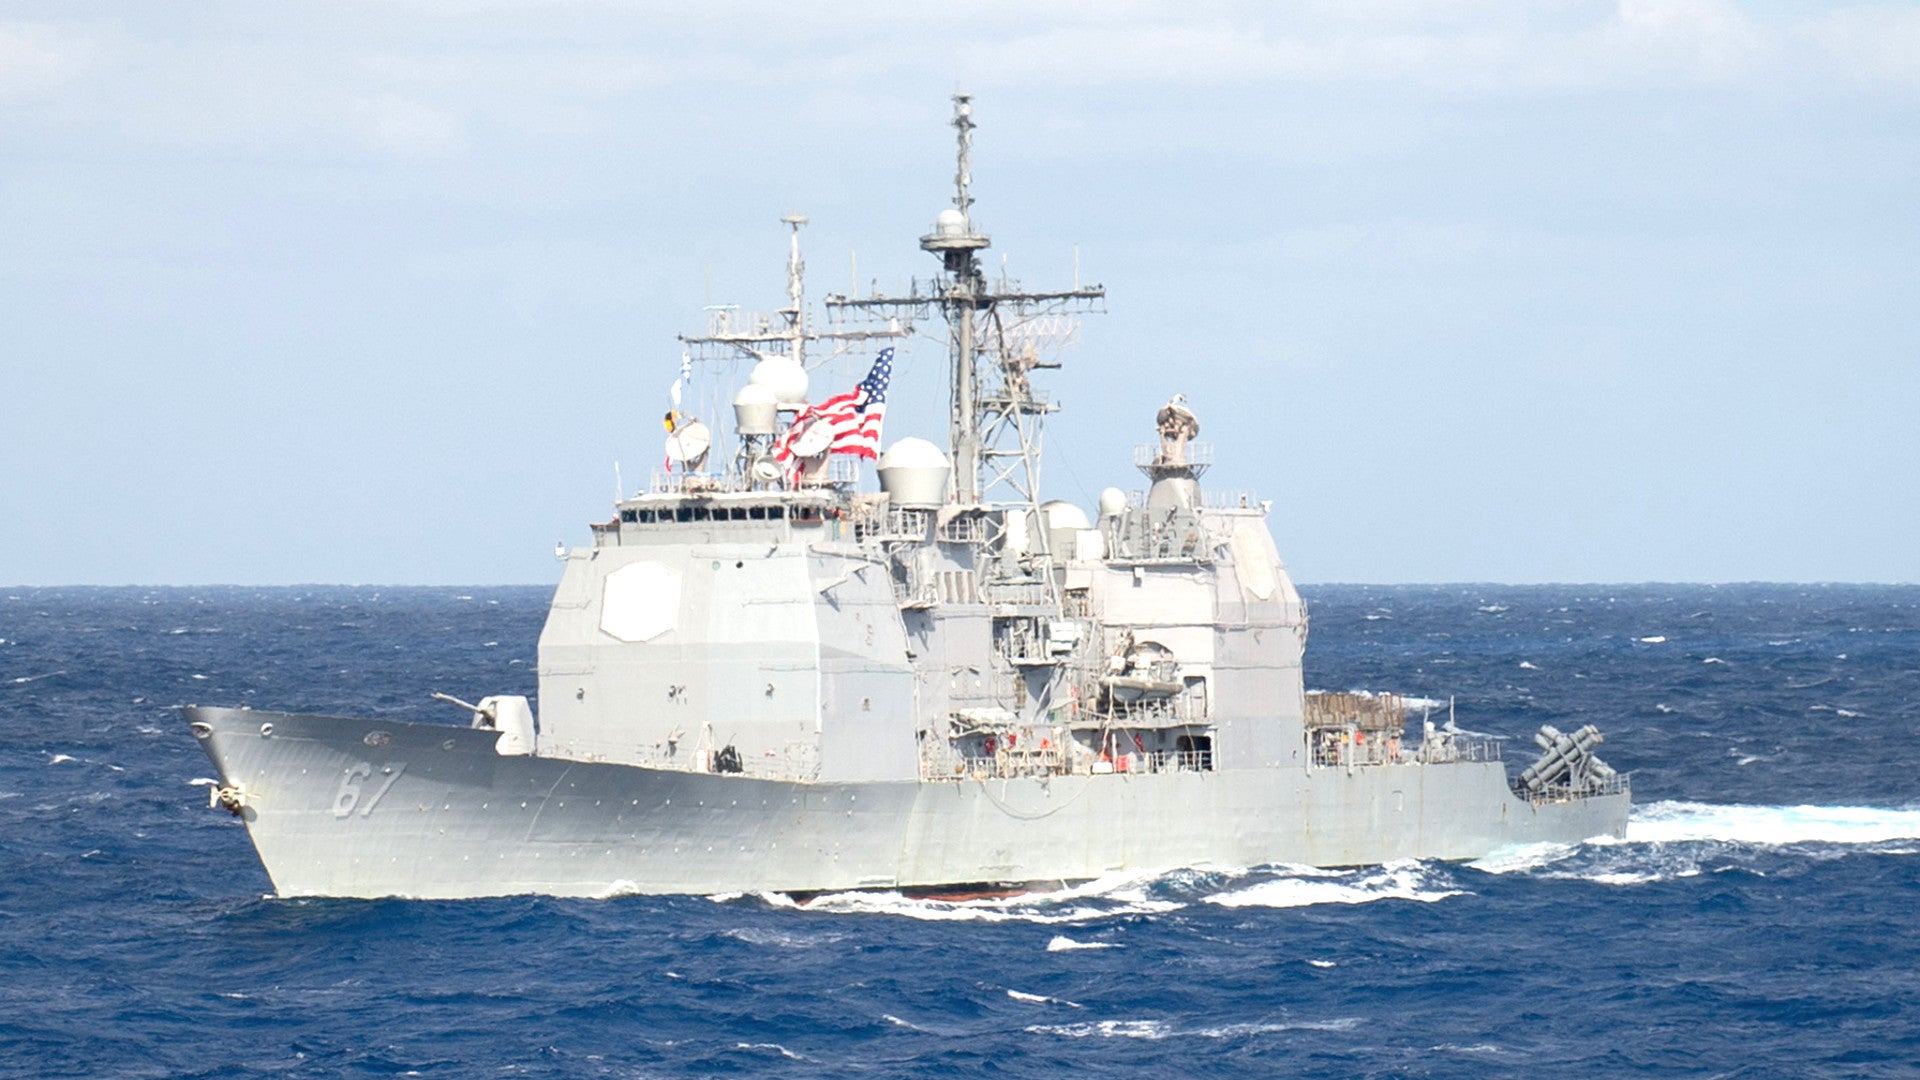 US Navy Plans to Cut Cruisers by Half Amid Reports One Became Like a “Floating Prison”